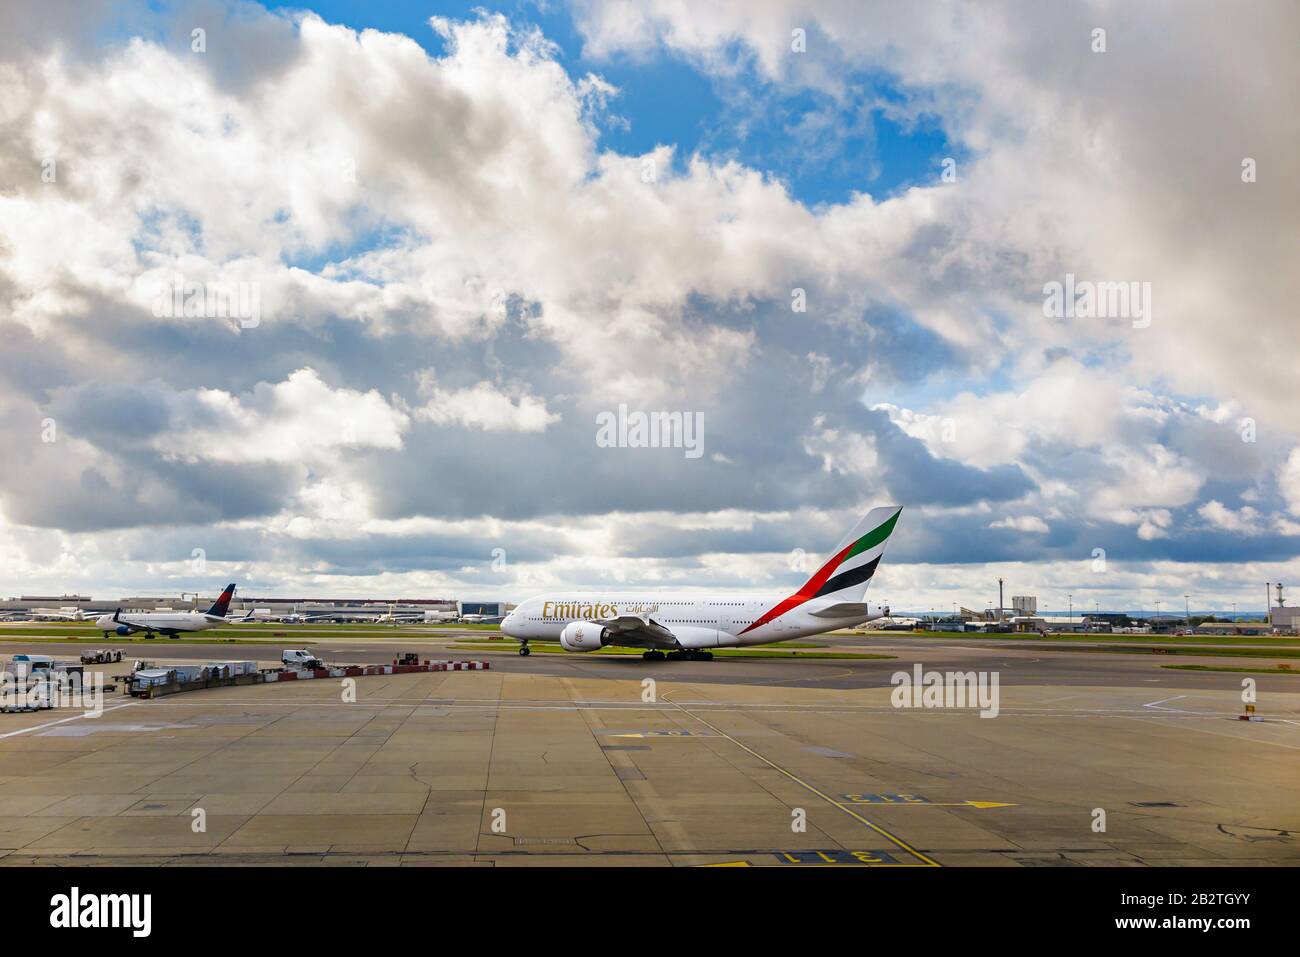 Emirates Airbus A380-861 in corporate livery standing on the runway at London Heathrow Airport on the runway awaiting take-off under dark heavy clouds Stock Photo